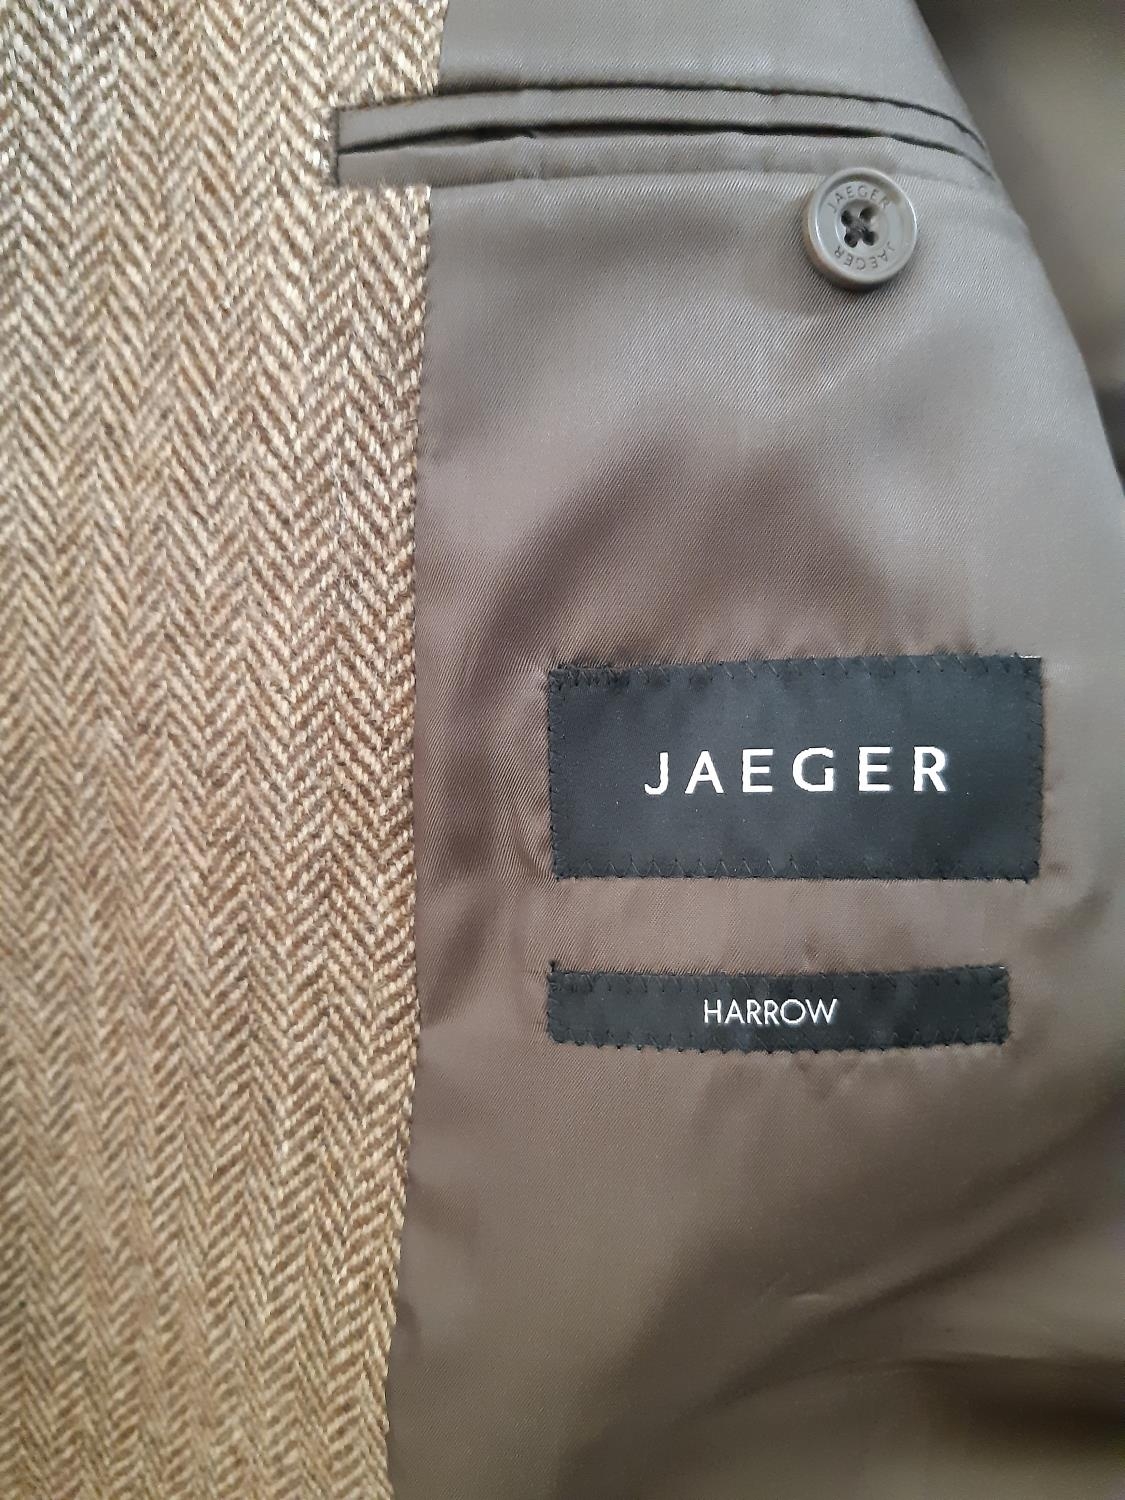 9 good quality men's tweed jackets, some like new with tags, brands include Jaeger, Peter Werth, - Image 8 of 8